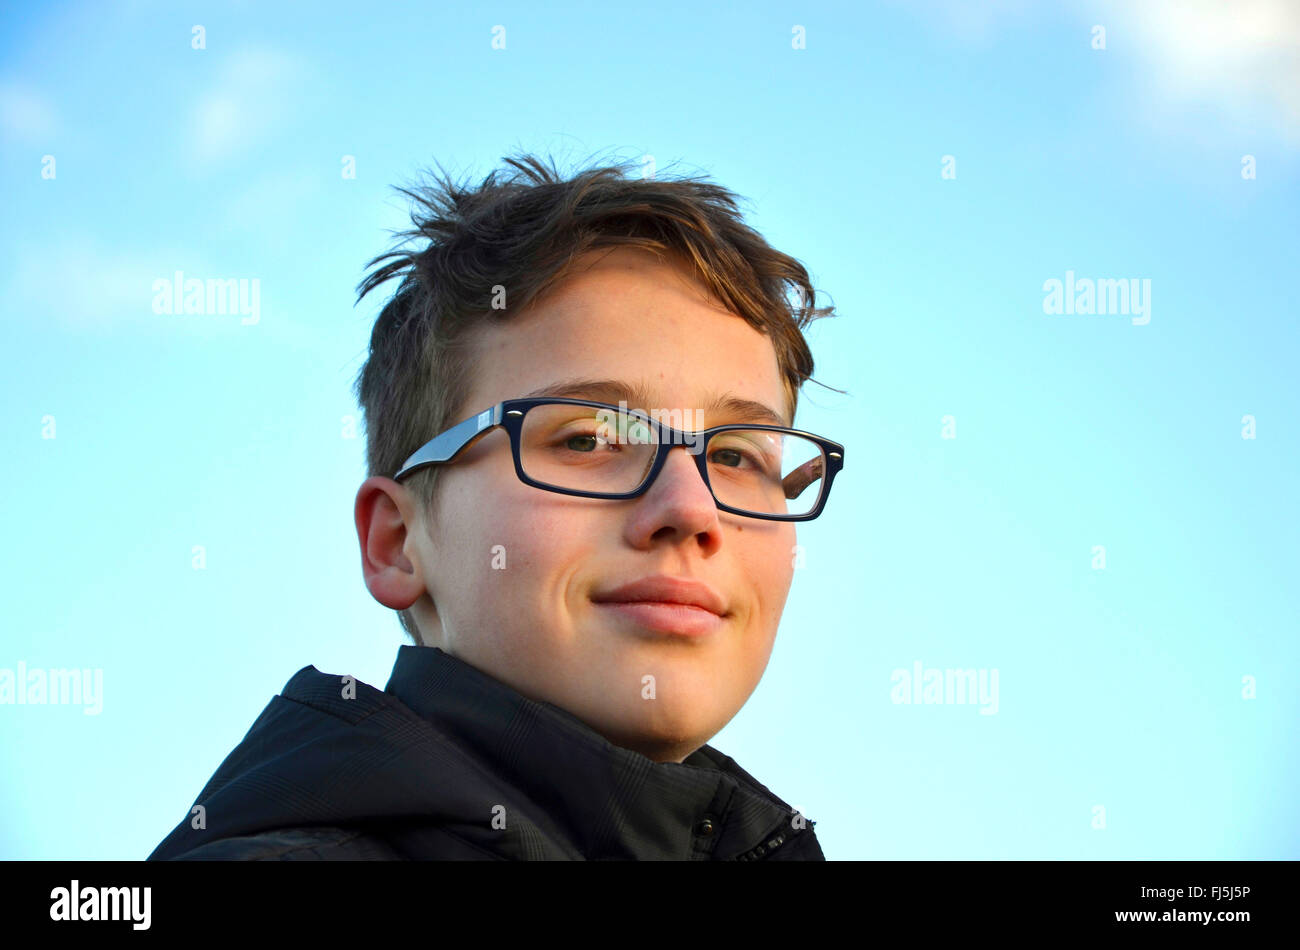 smiling boy with glasses, portrait of a child Stock Photo